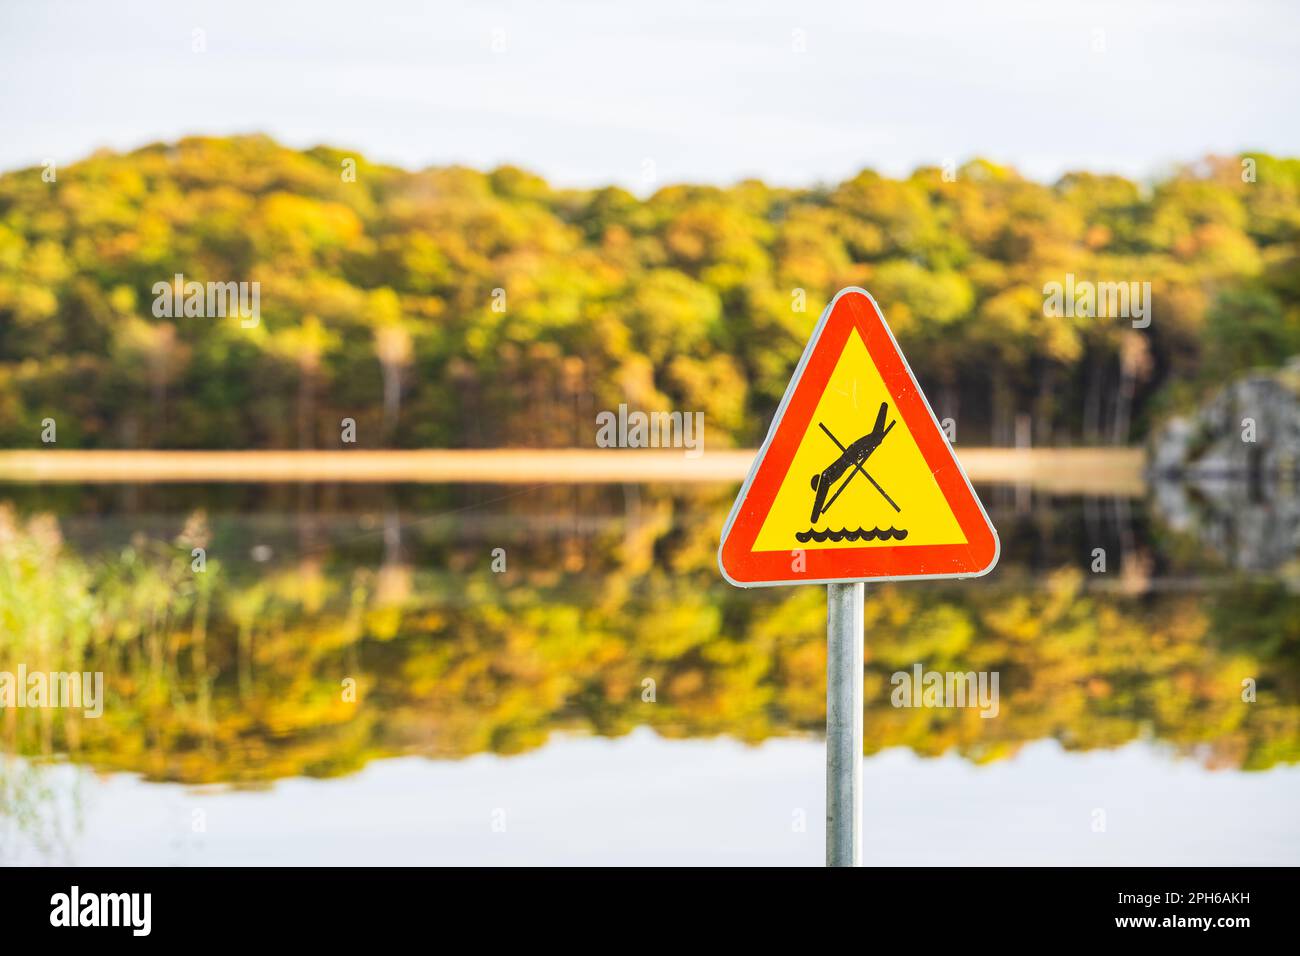 A bright yellow triangle-shaped warning sign prohibiting diving in a peaceful Swedish lake, emphasizing the importance of communication. Stock Photo